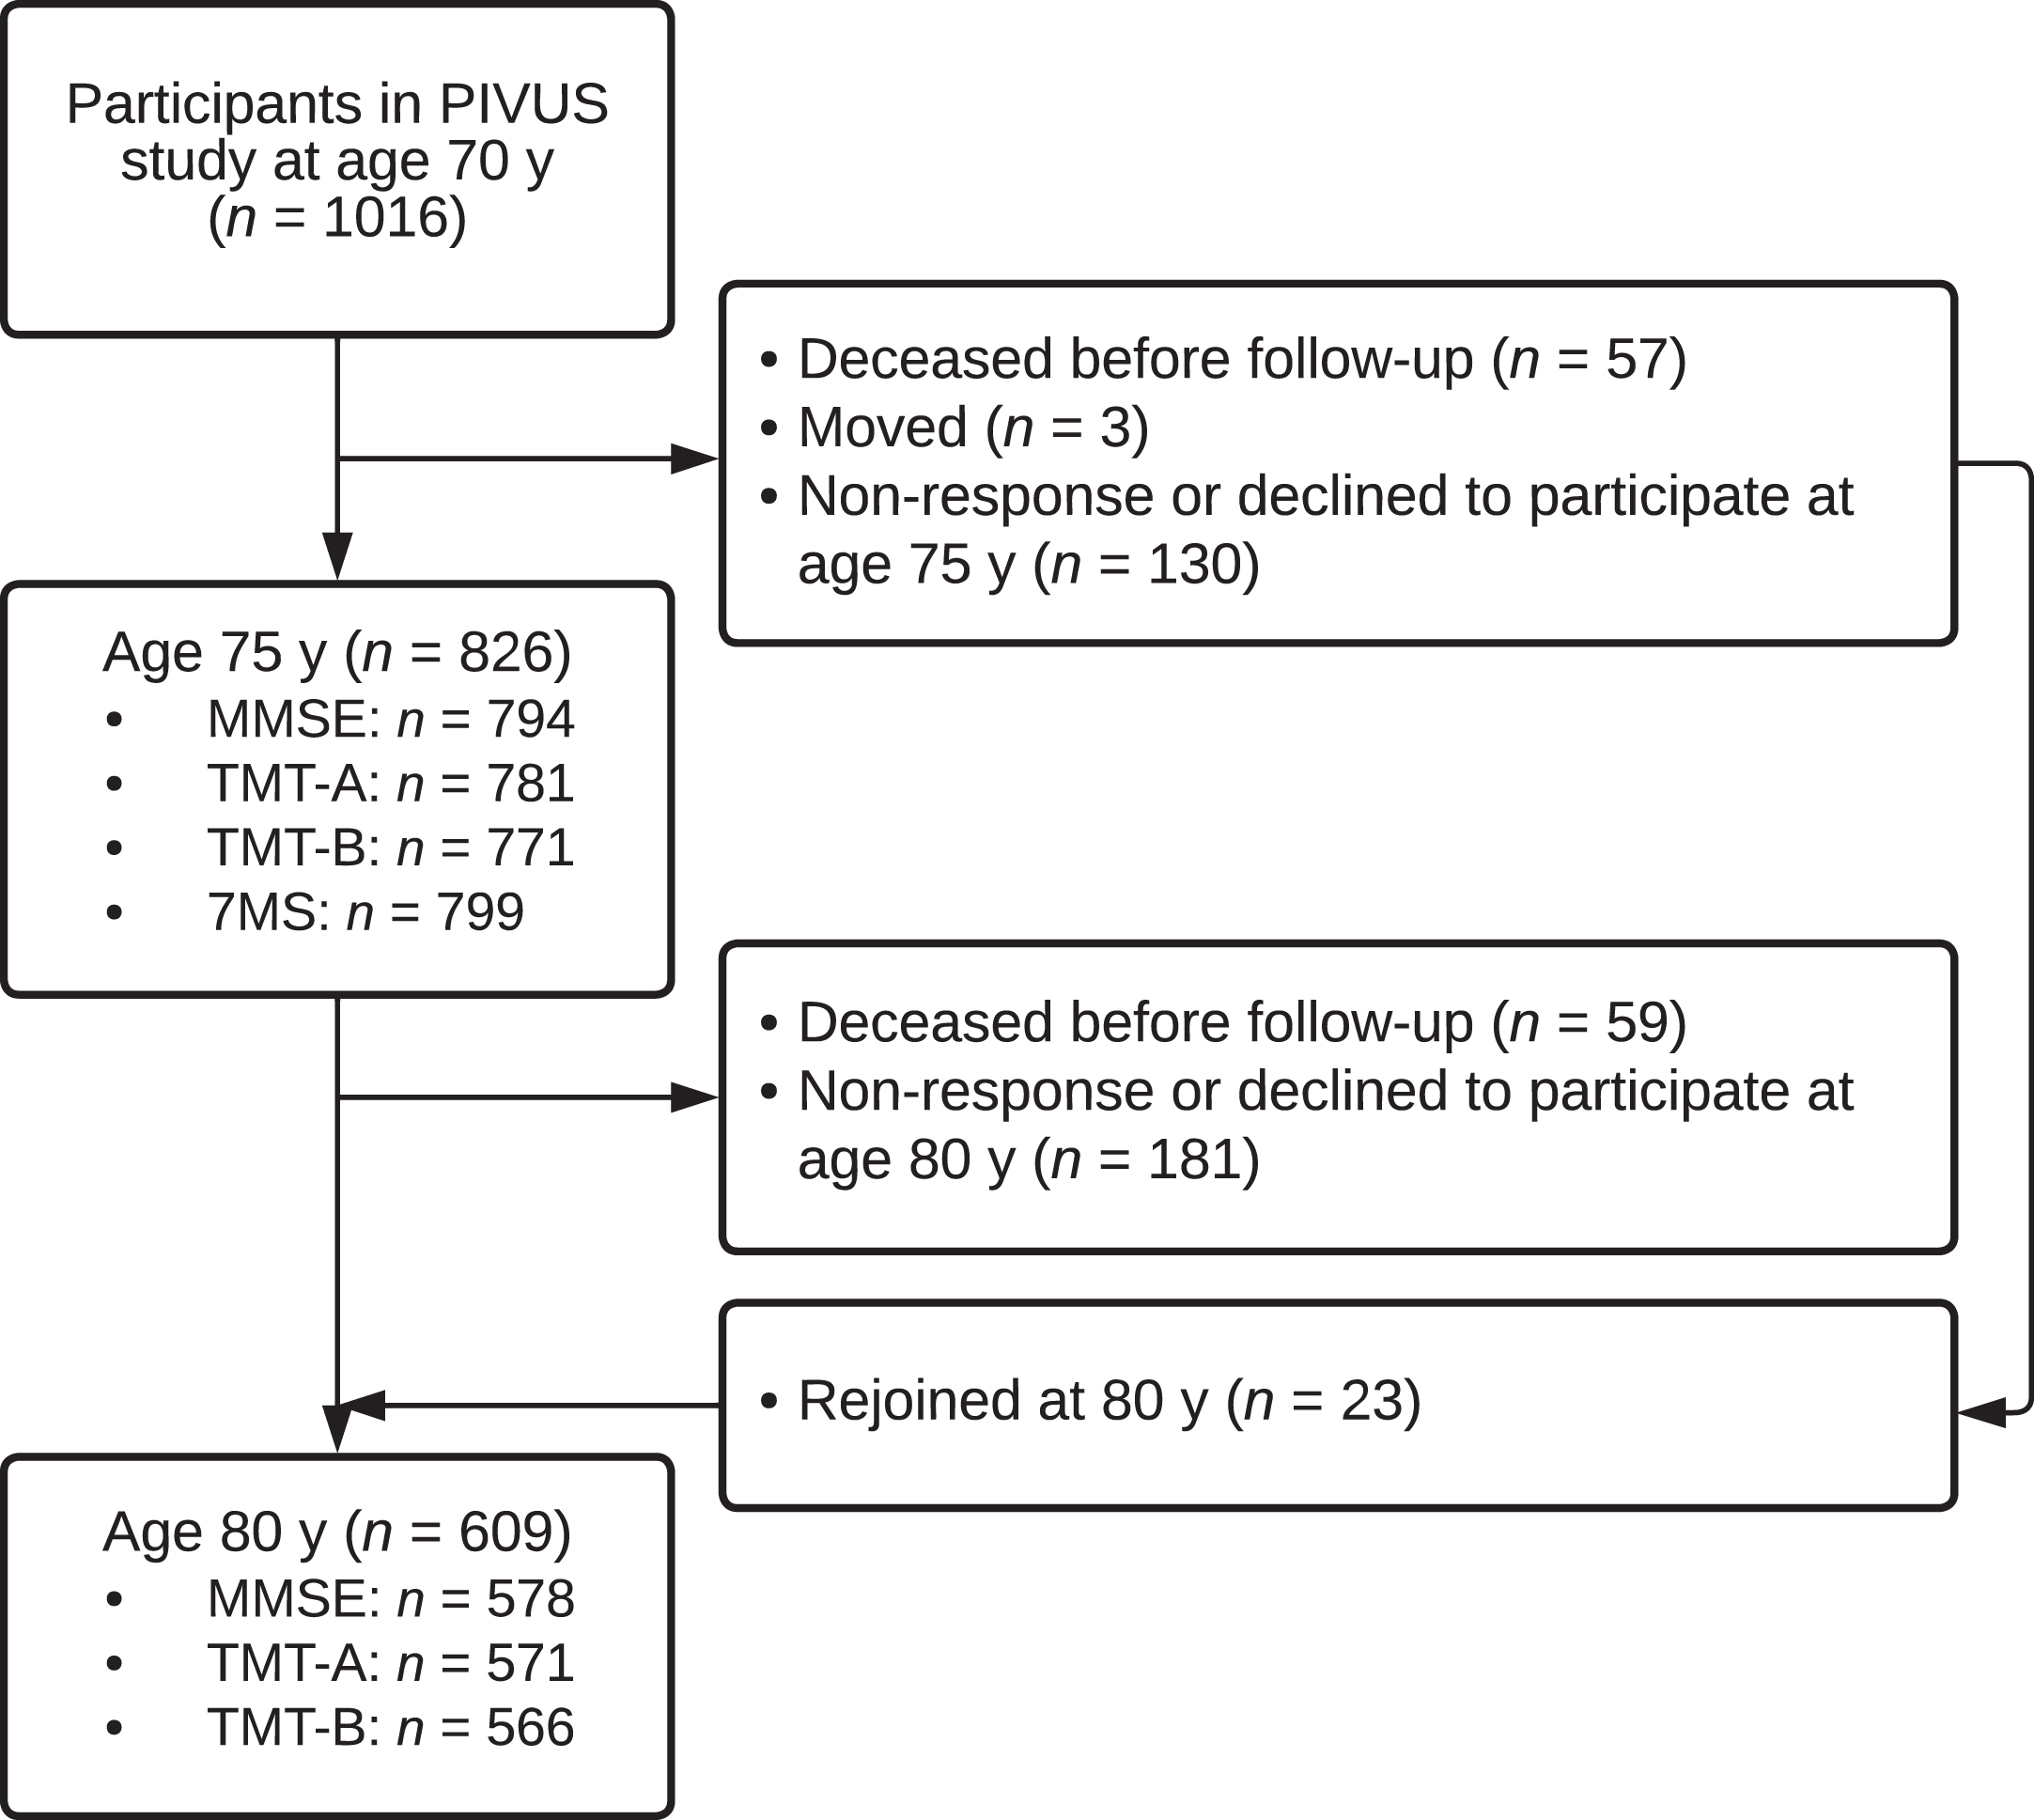 Flow of study participation. PIVUS, Prospective Investigation of the Vasculature in Uppsala Seniors; y, years; MMSE, Mini-Mental State Examination; TMT, trail-making test; 7MS, 7-minute screening test.